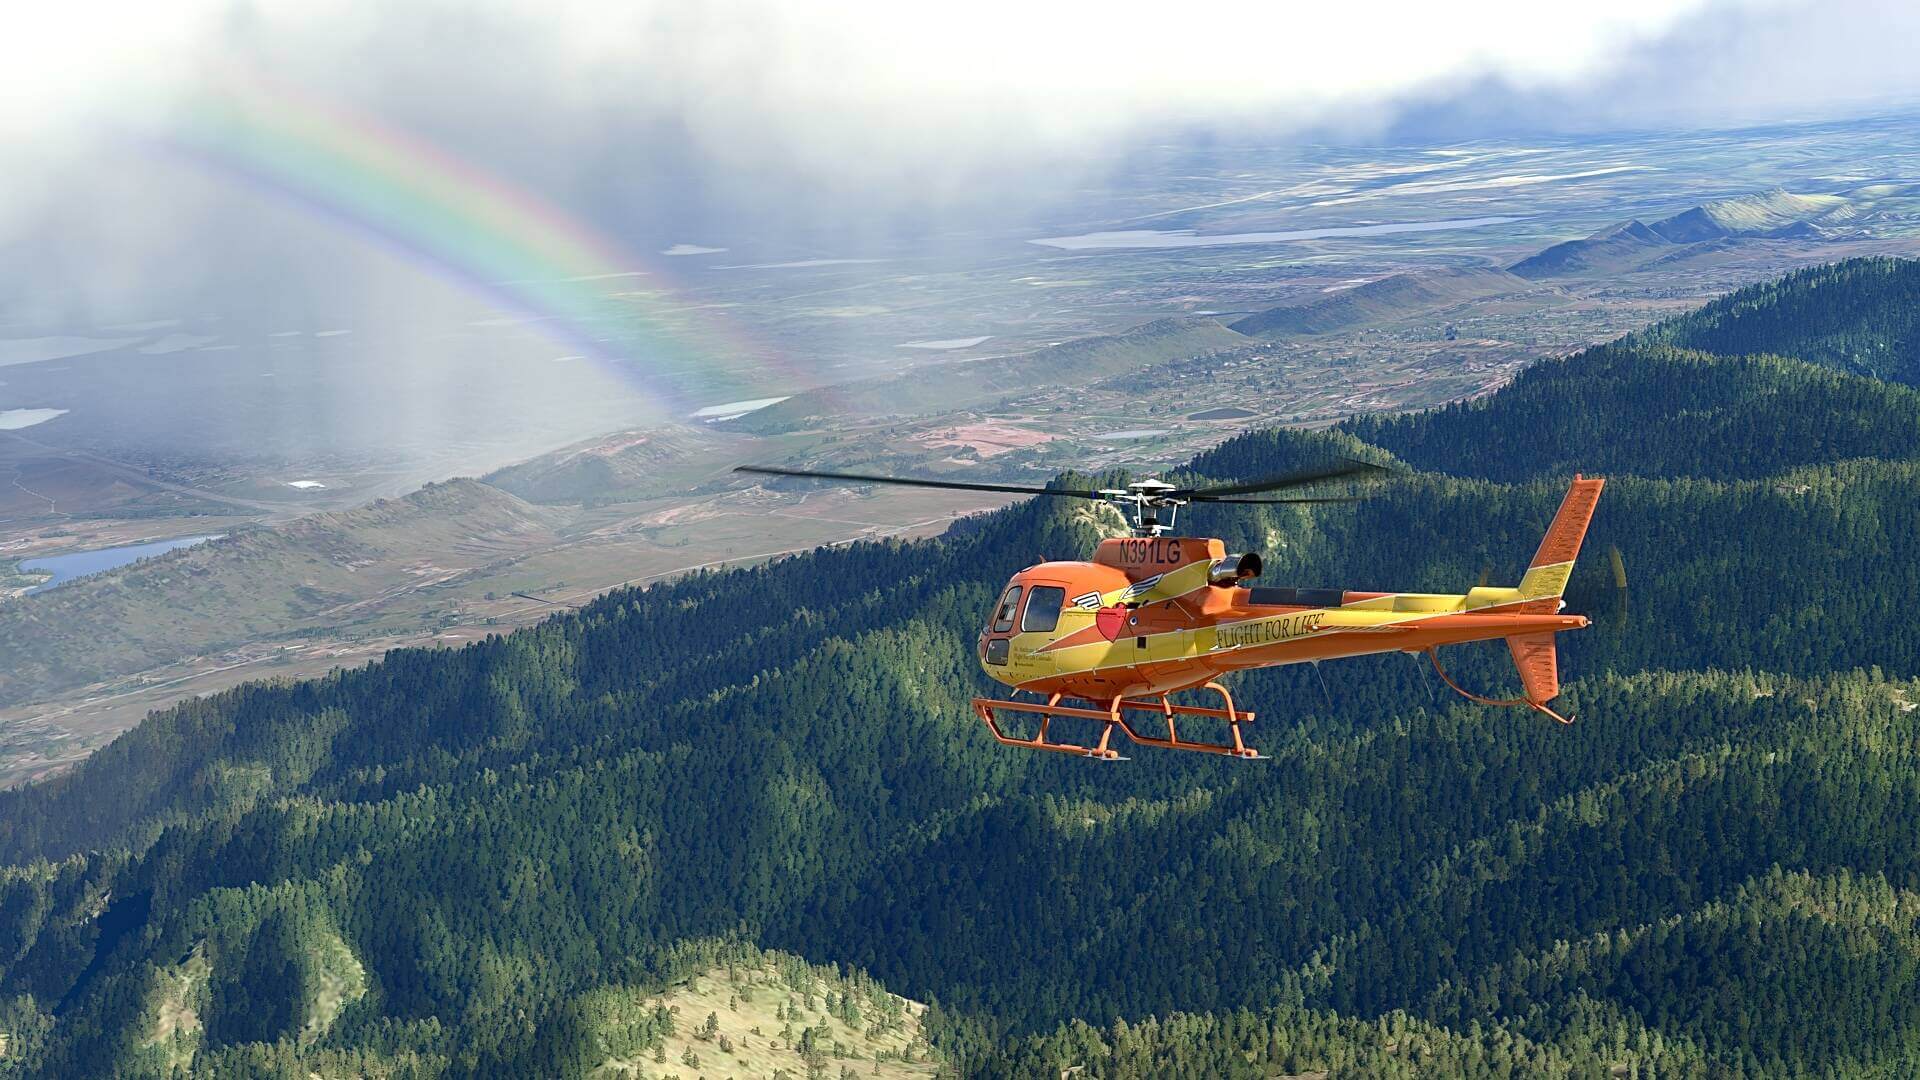 The H-125 helicopter in an orange and yellow livery scheme flies over a dense forest directly towards a rainbow